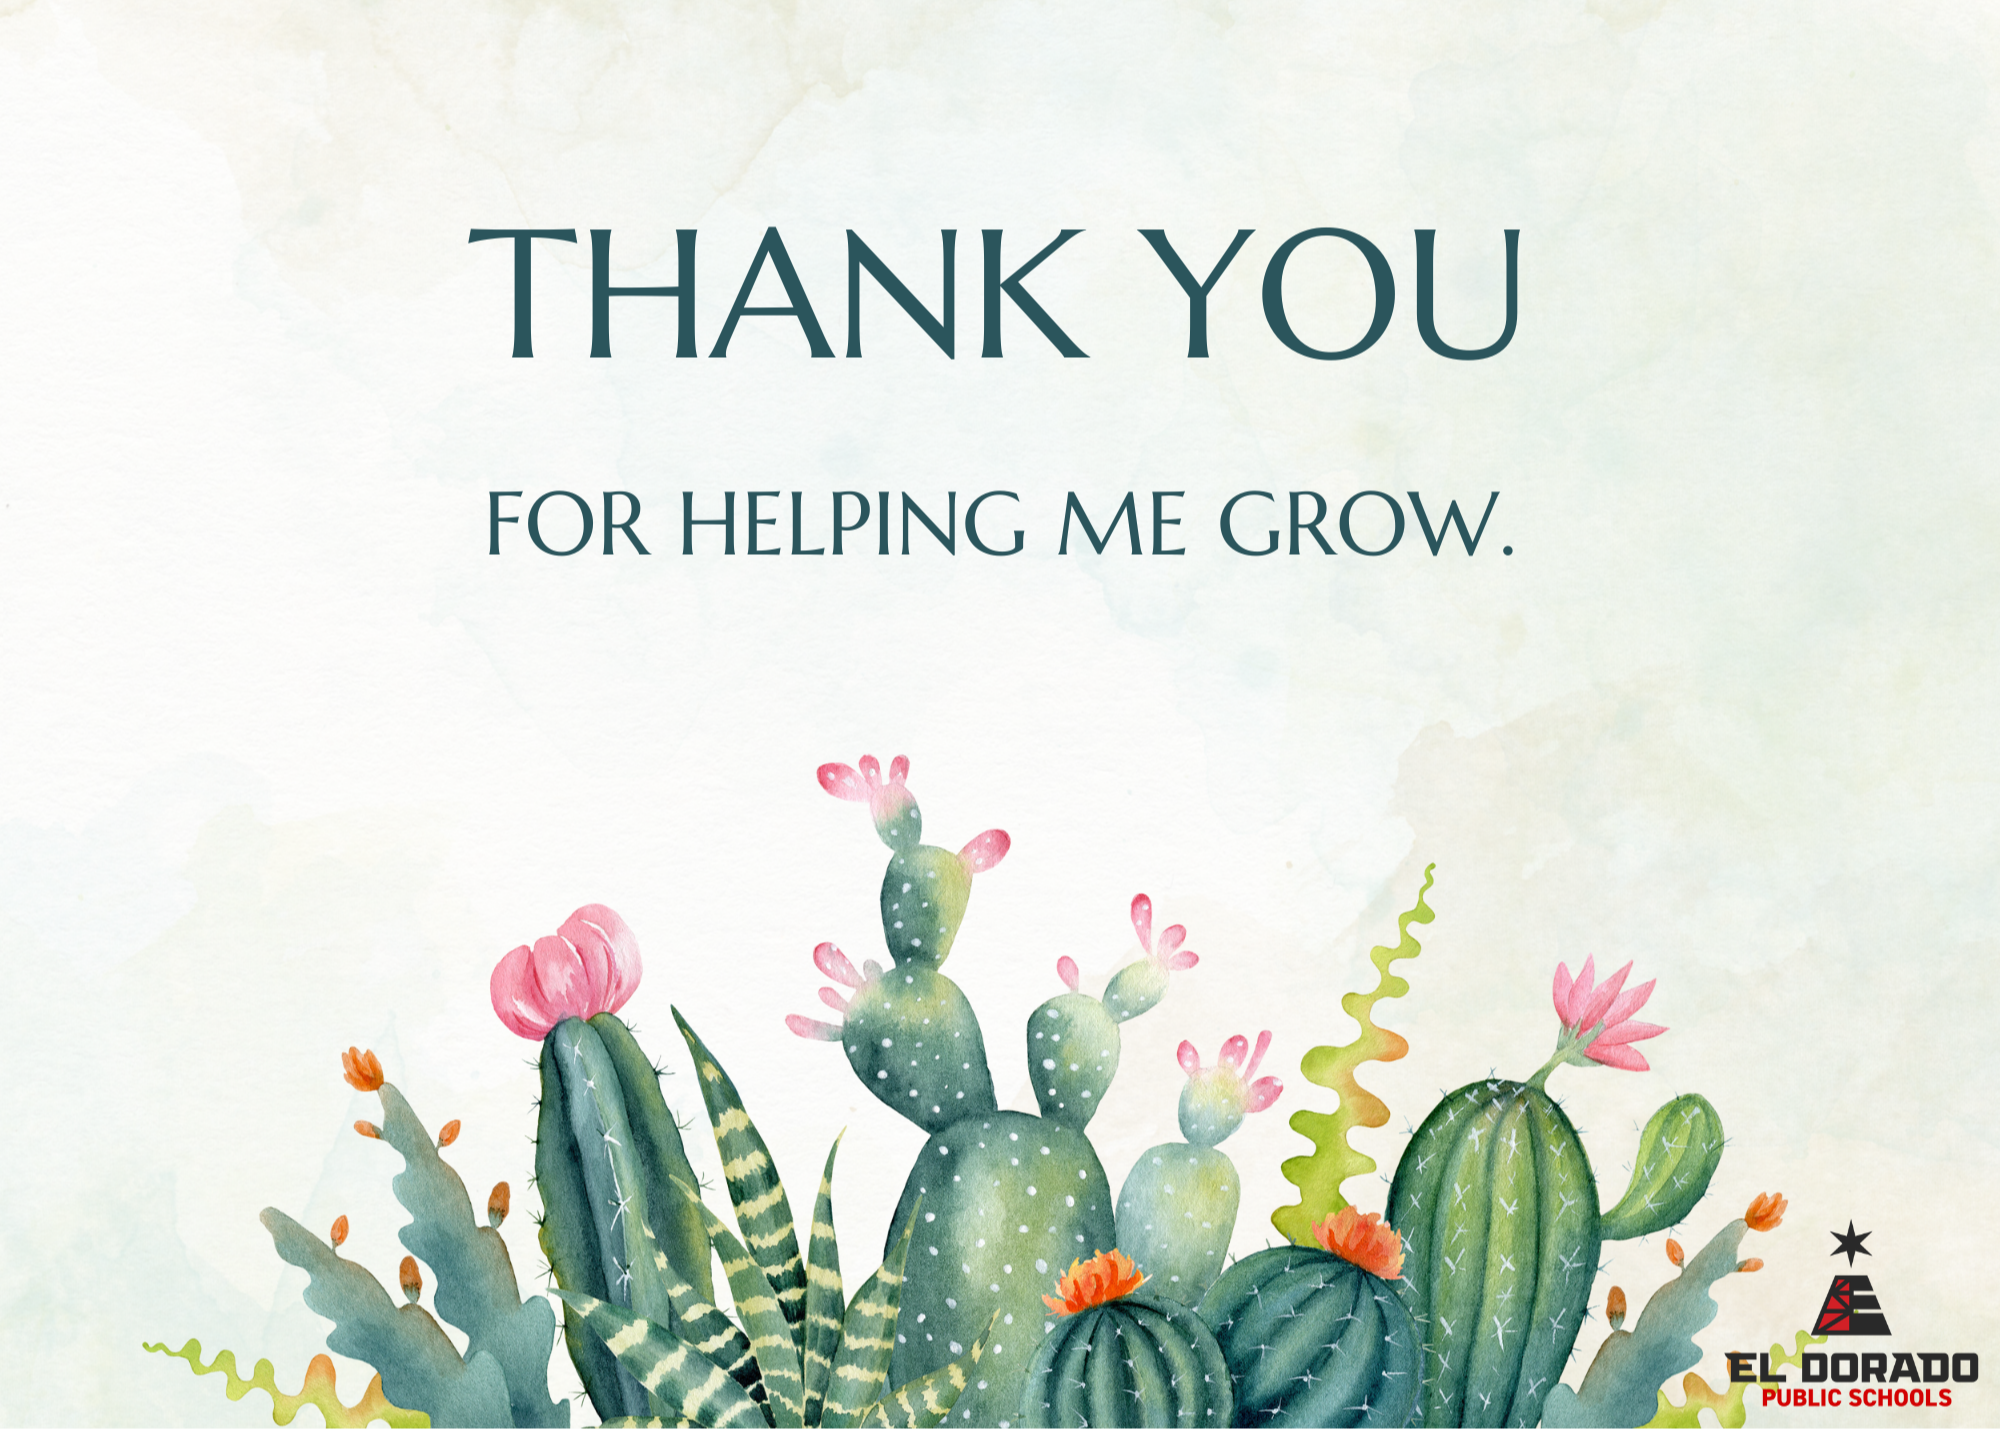 Thank you for helping me grow.